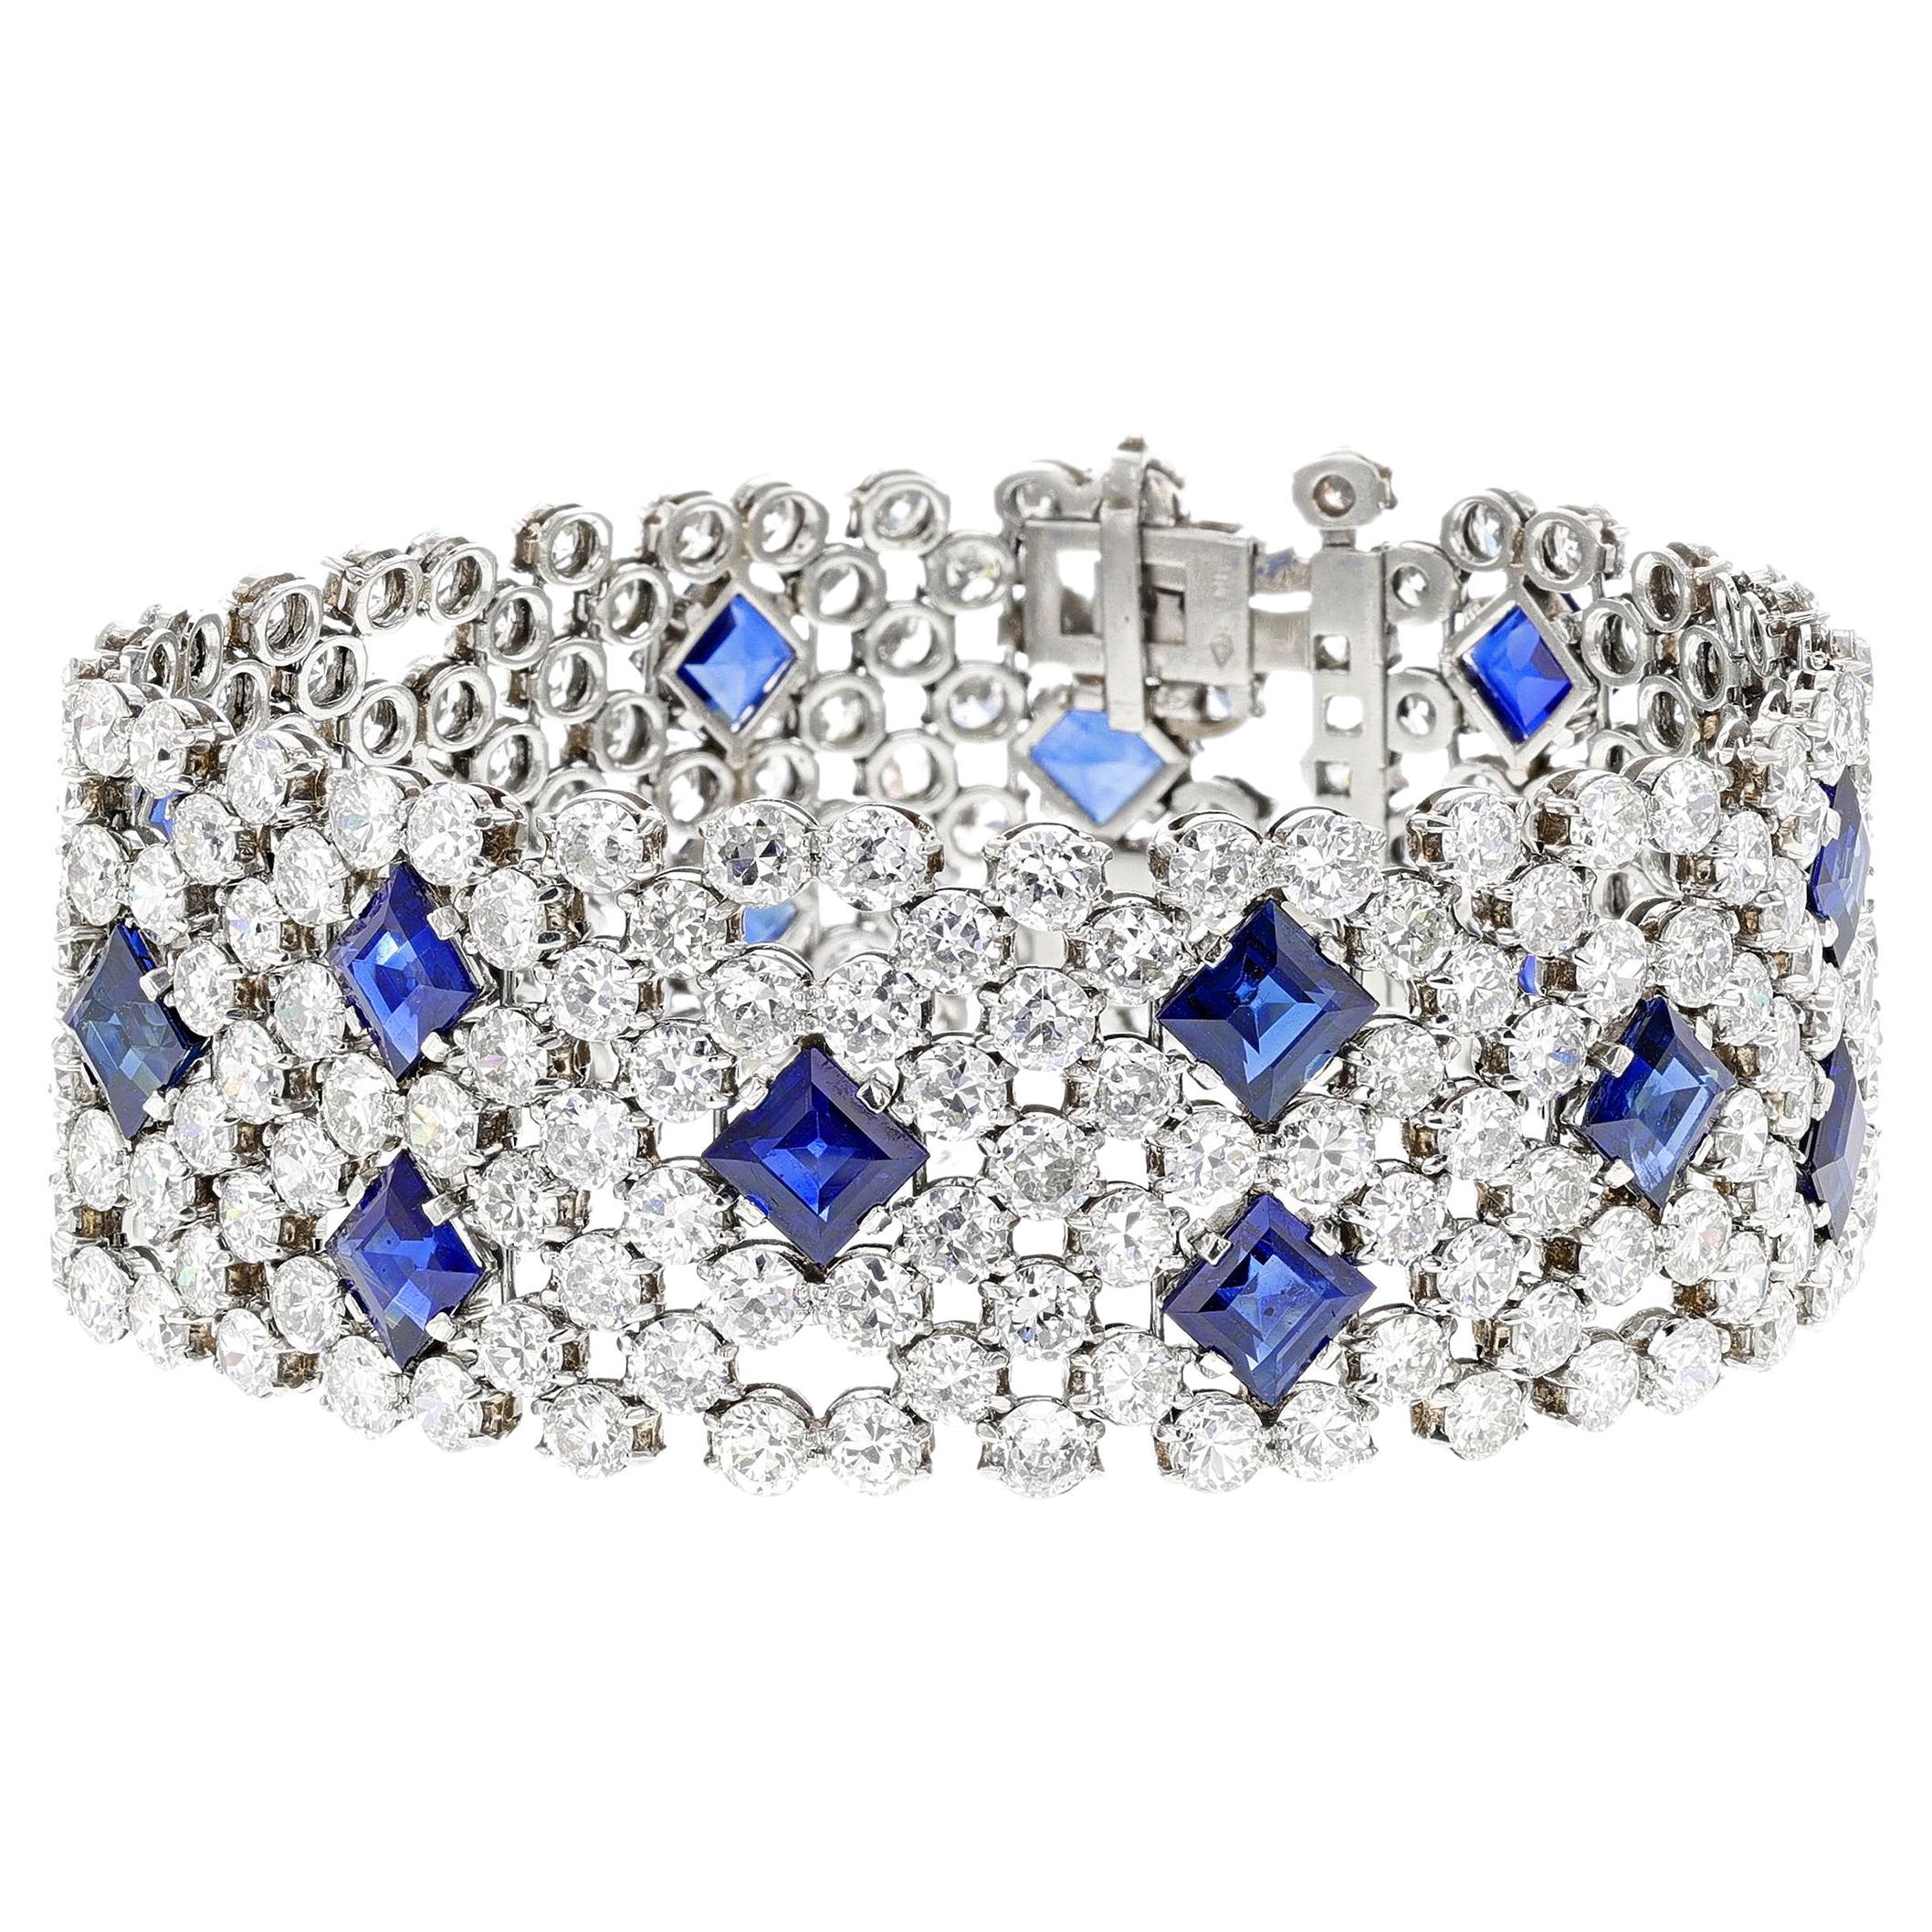 A stunning Blue Sapphire and Diamond Bracelet made in Platinum by Charles Holl, a French jewelry designer for Cartier and Van Cleef & Arpels. The bracelet weighs approximately 64.59 grams. The length is 7.10 inches and the width is 0.90